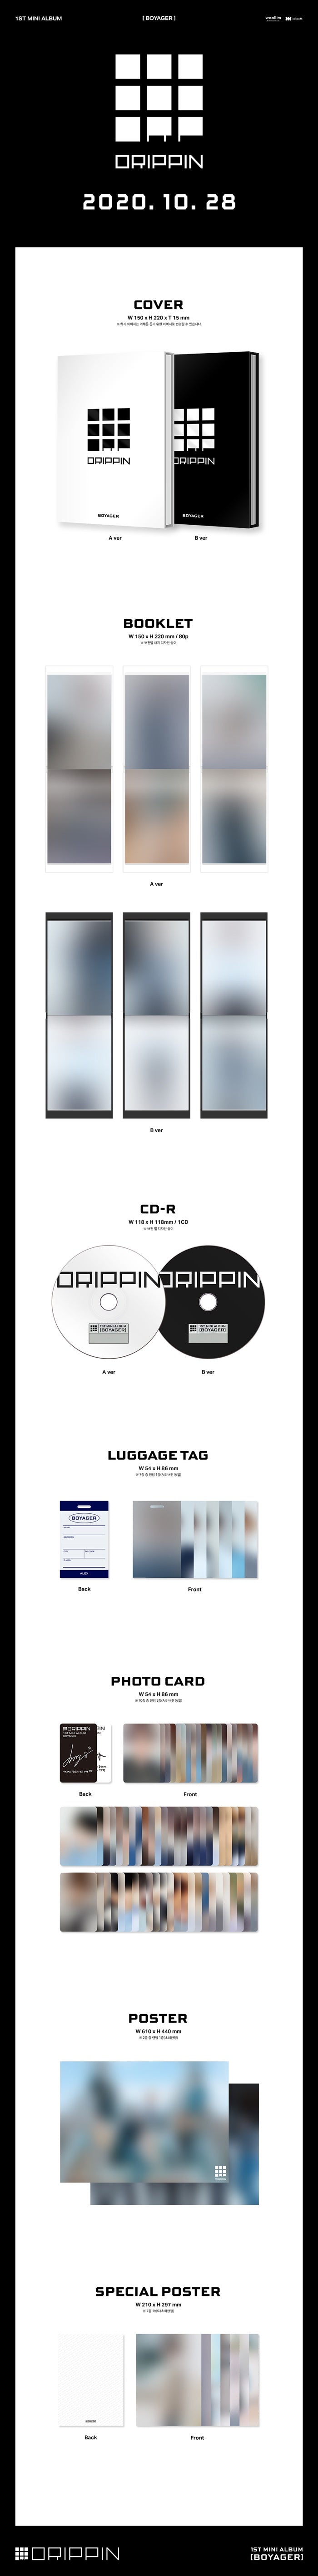 1 CD
1 Booklet (80 pages)
1 Luggage Tag
2 Photo Cards